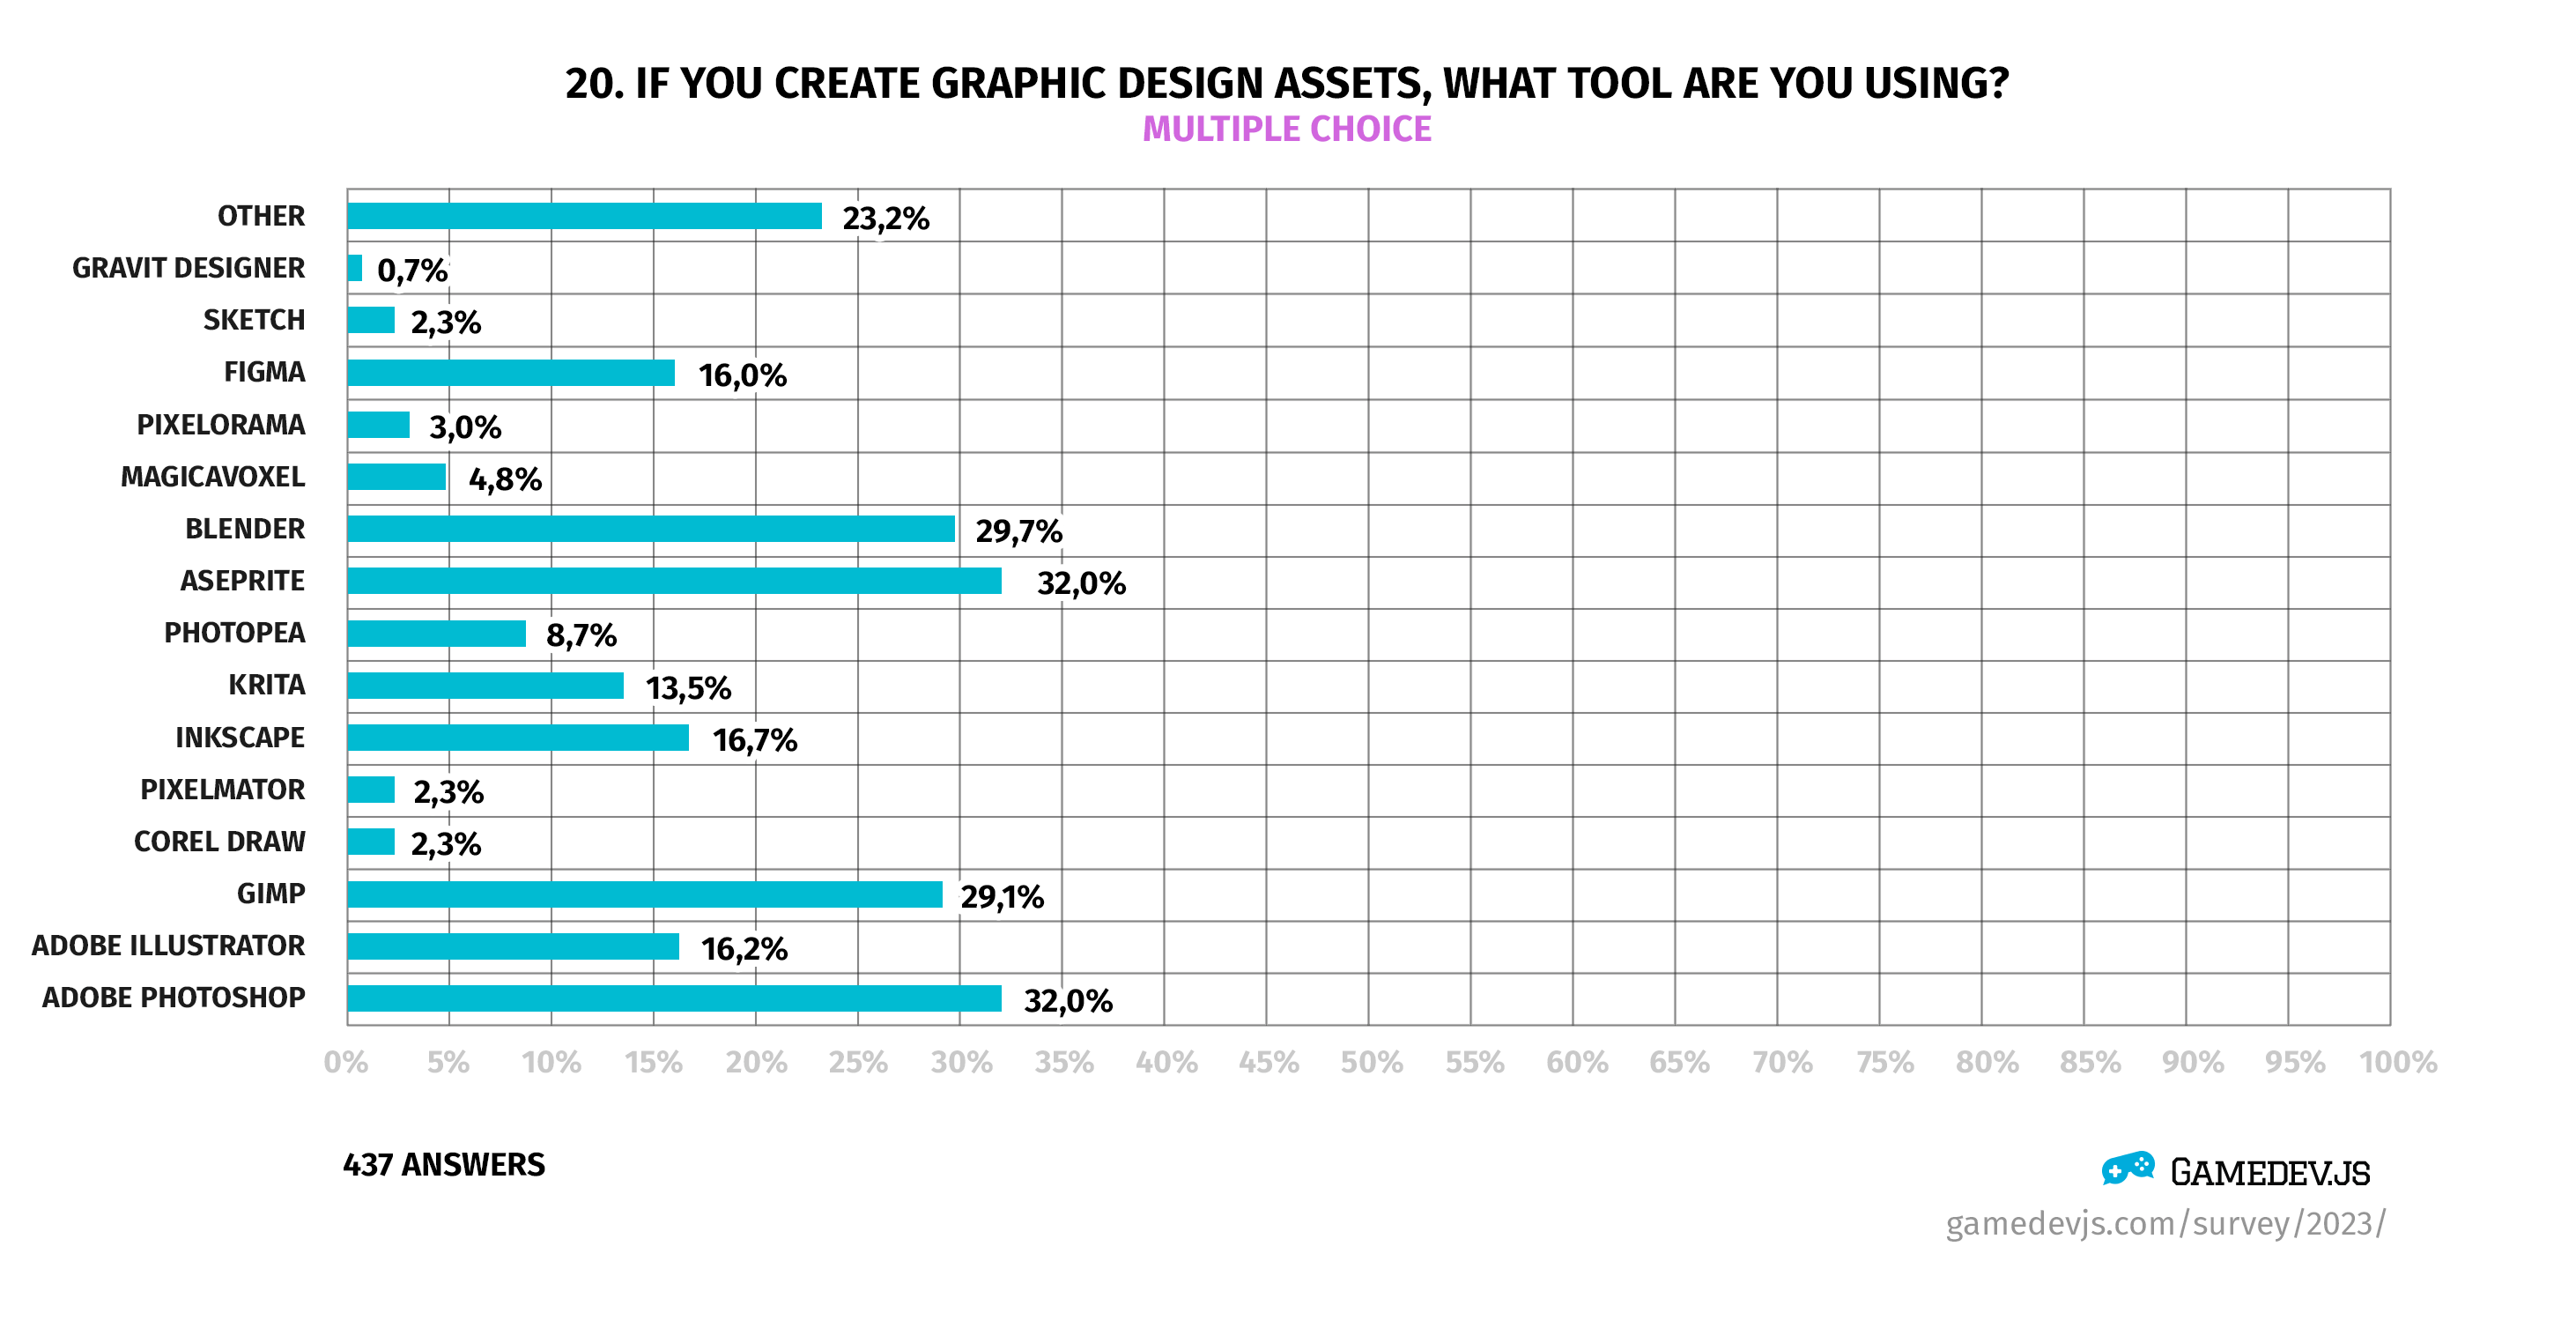 Gamedev.js Survey 2023 - Question #20: If you create graphic design assets, what tool are you using?